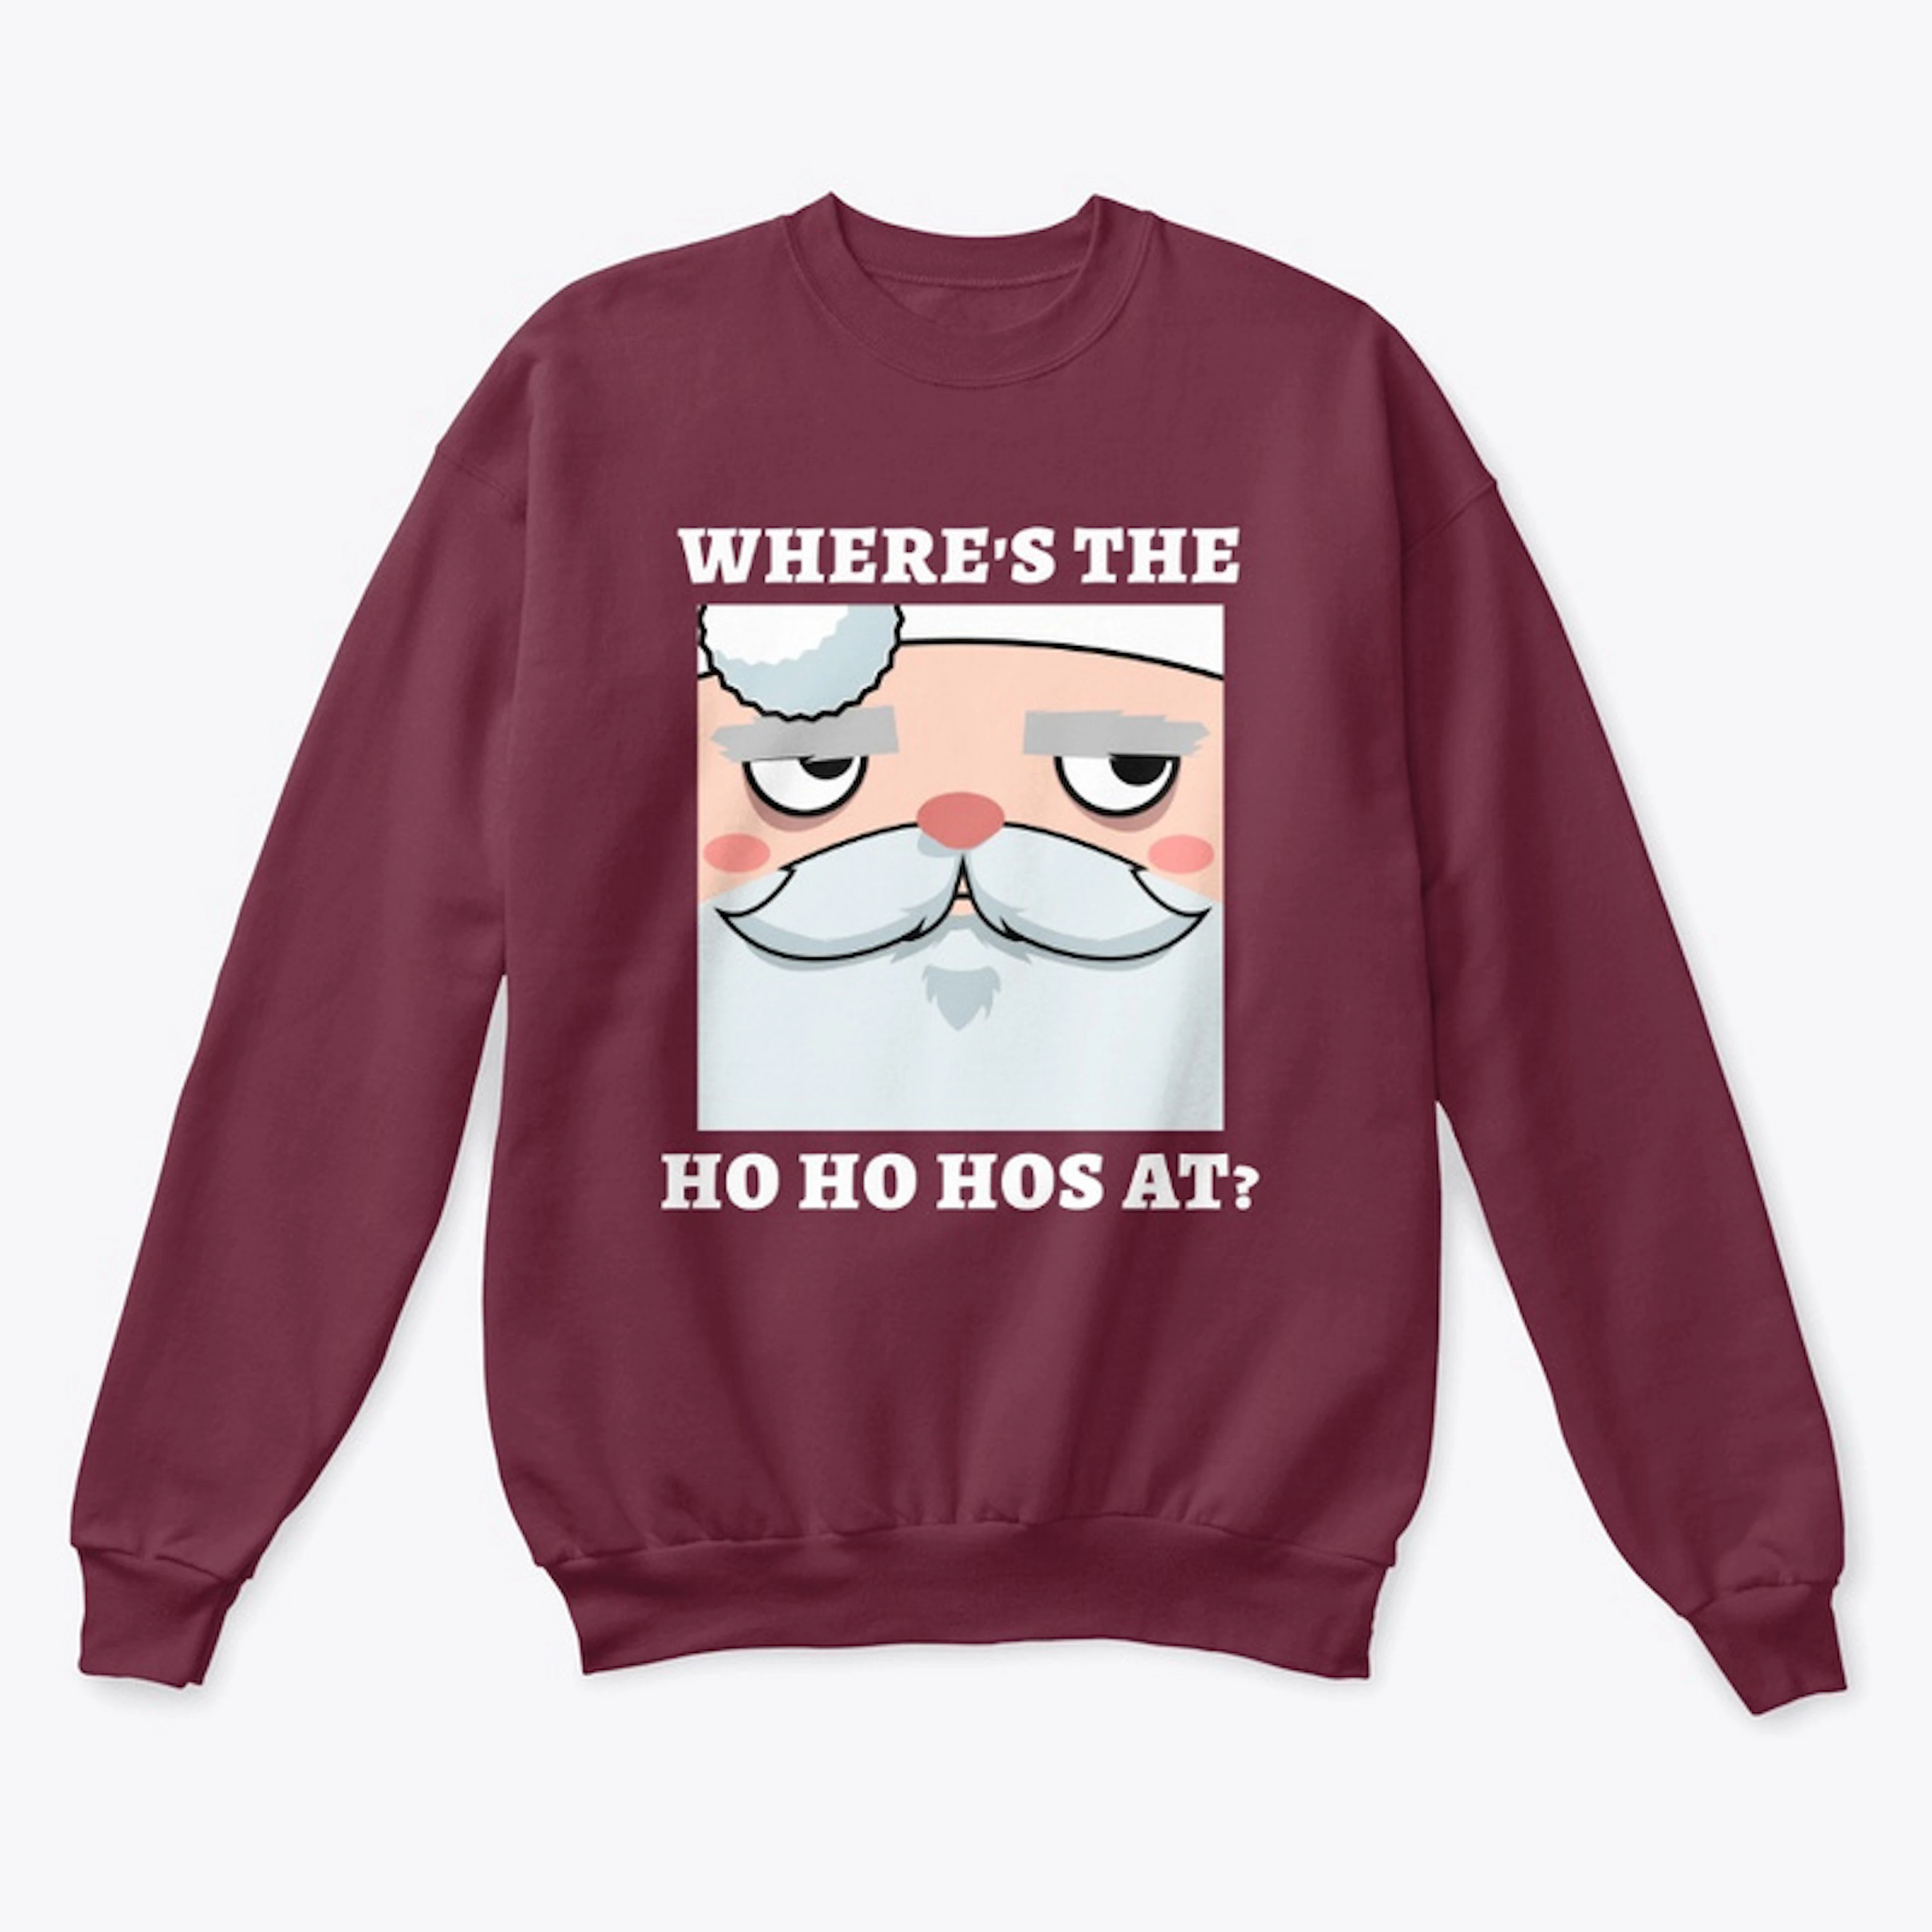 Where's the Hos at? Christmas Sweater!